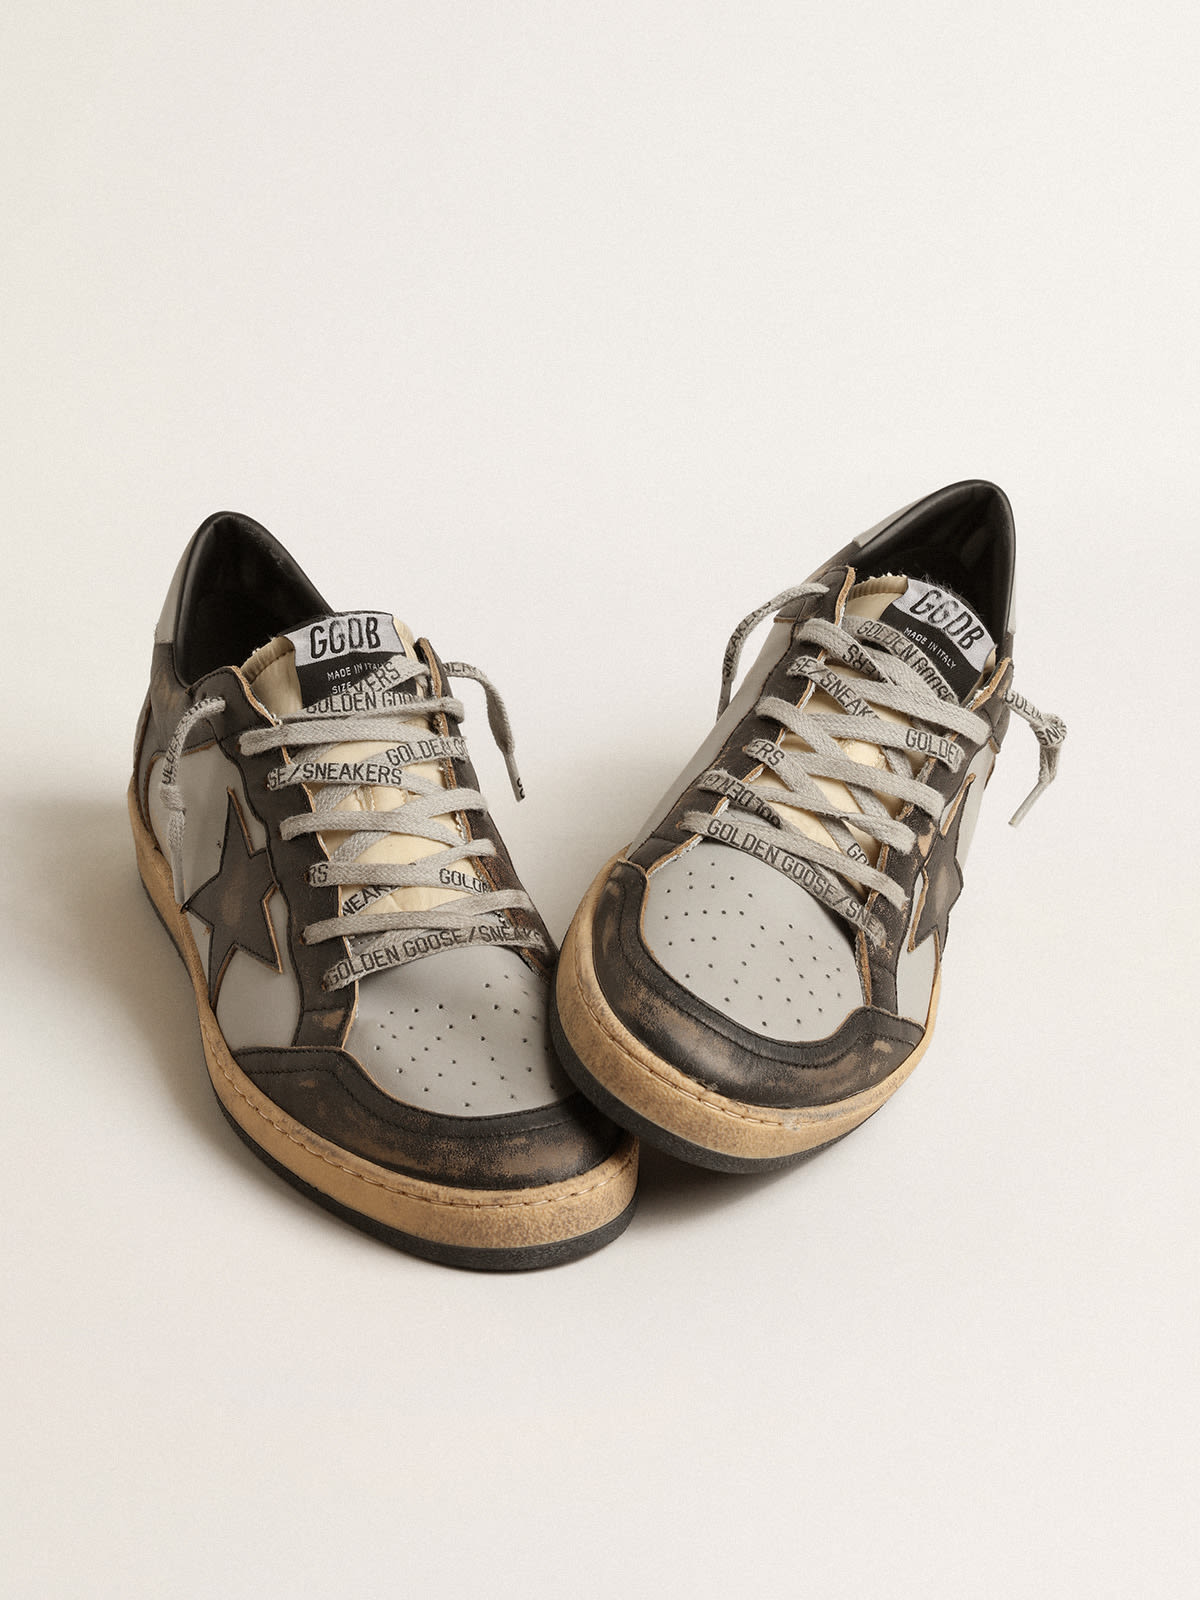 Golden Goose - Ball Star in gray and black leather with black star in 